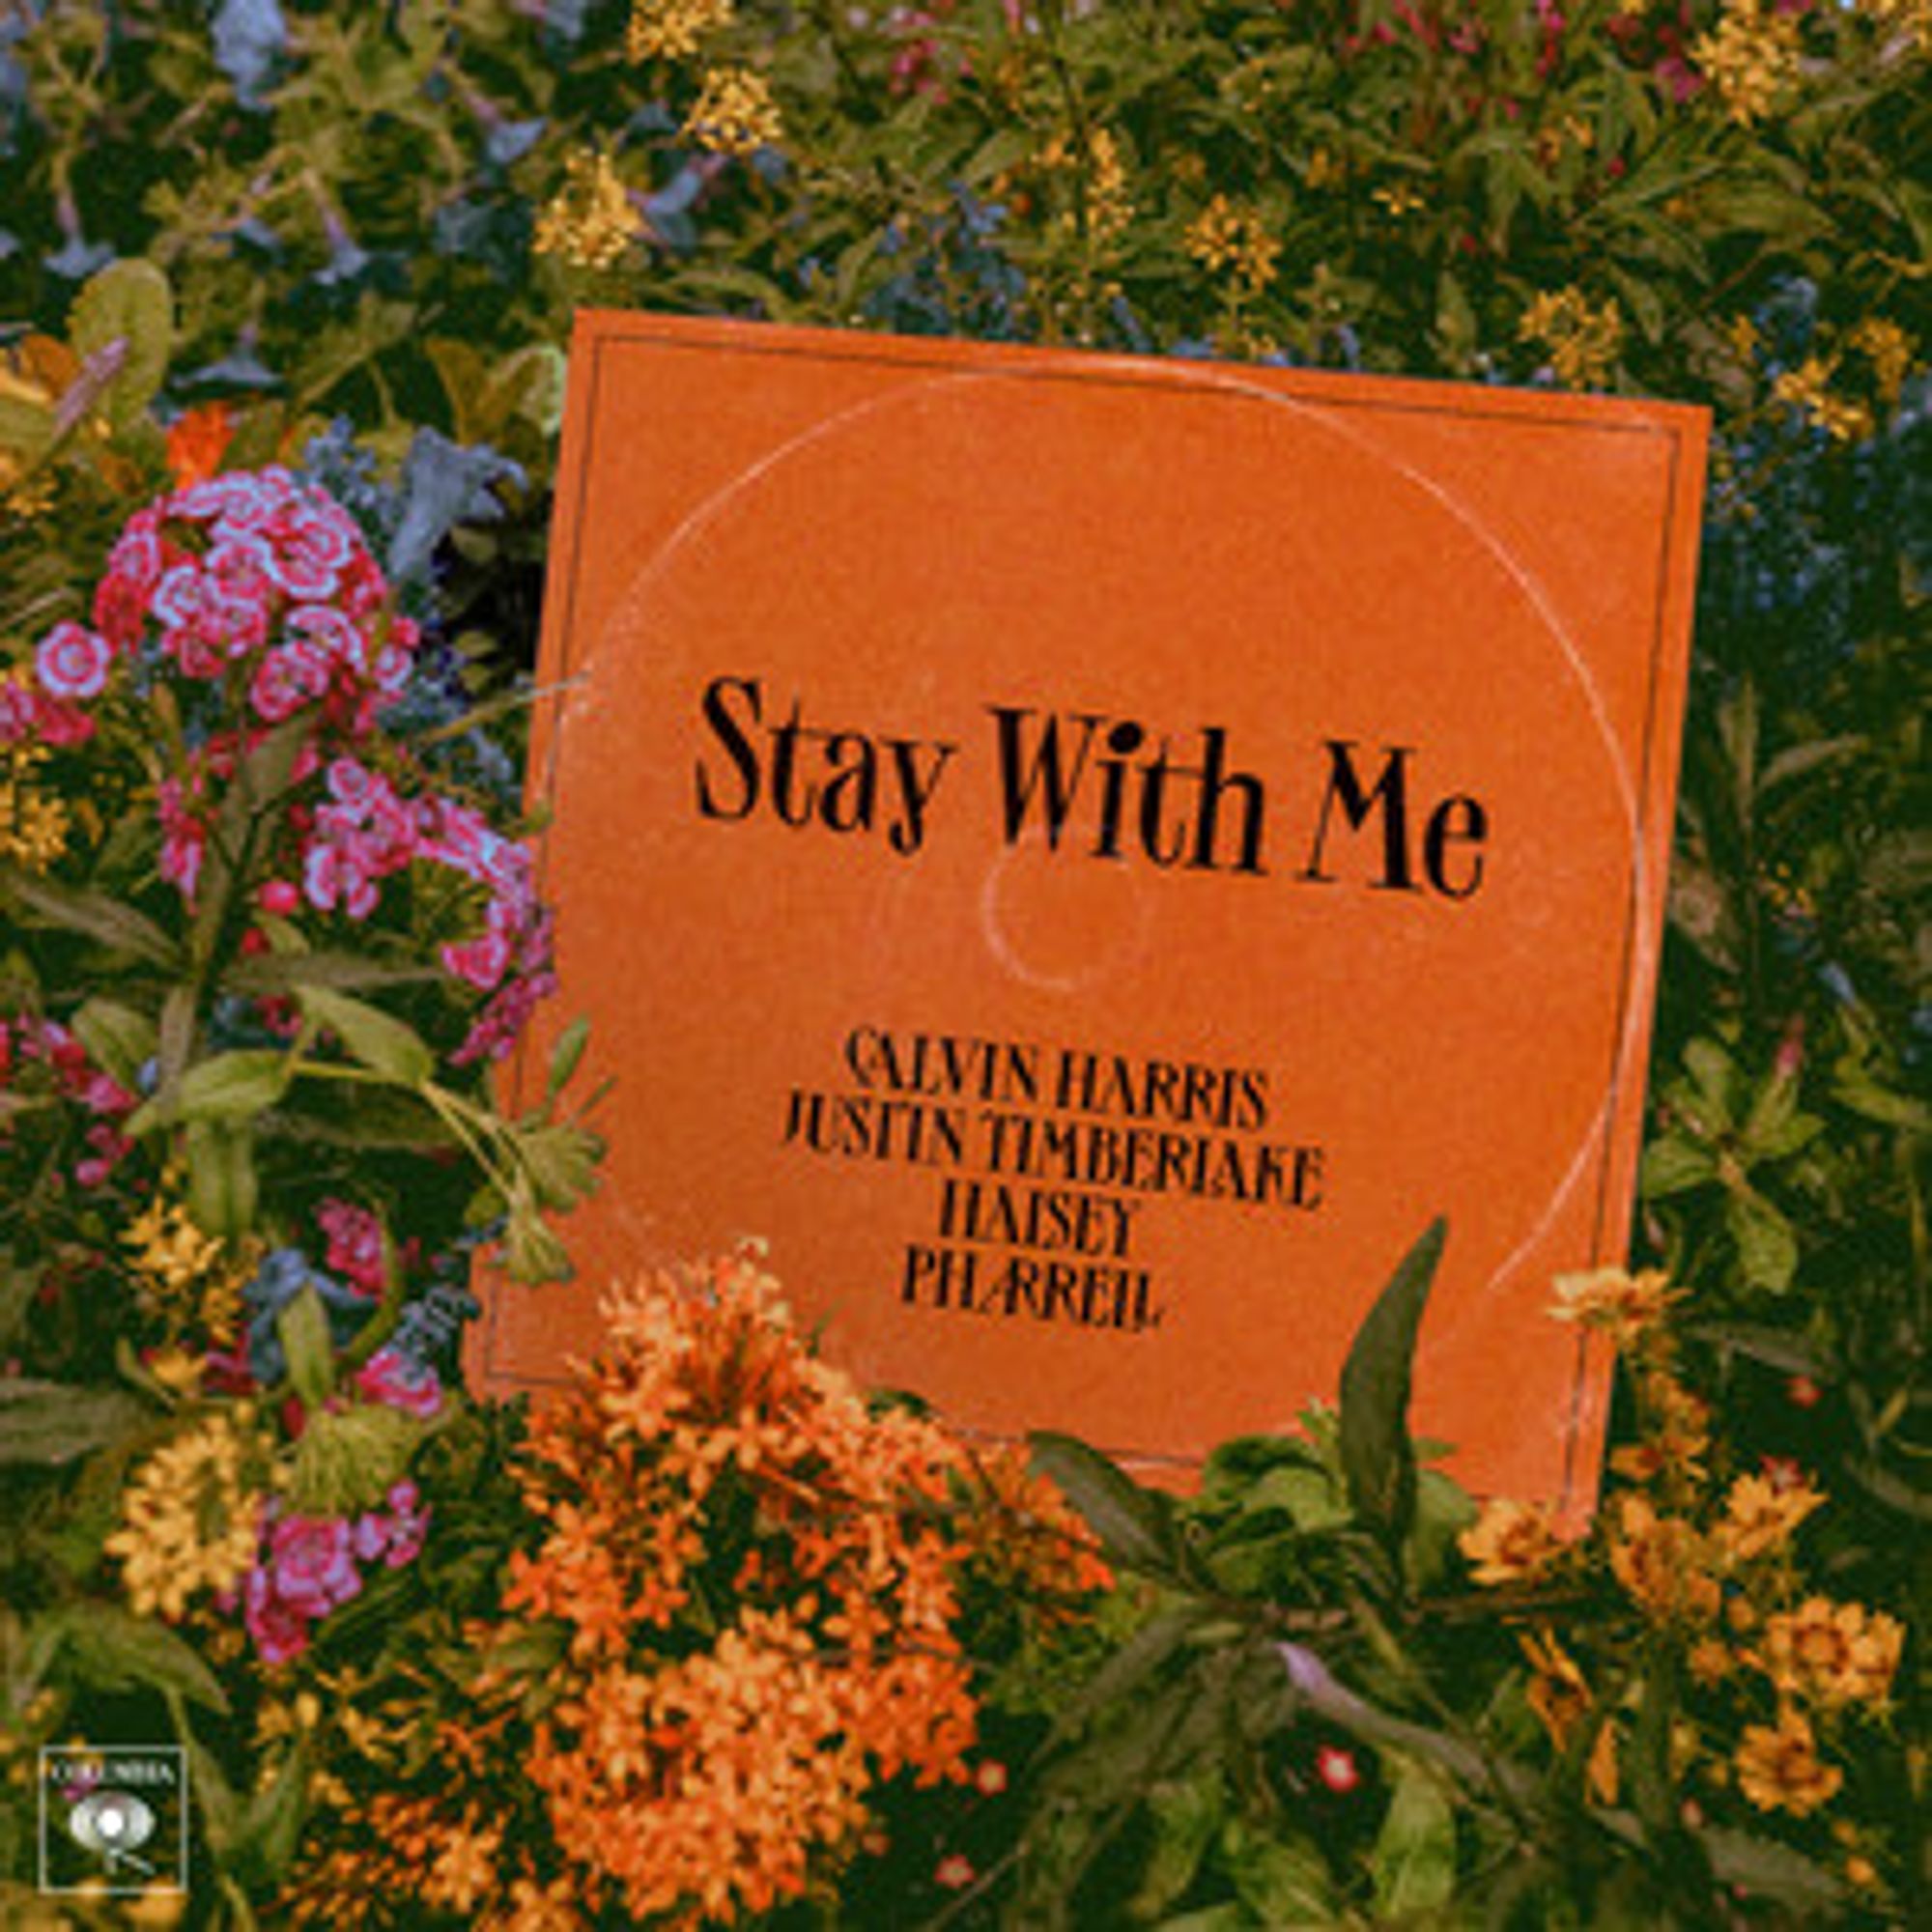 Stay With Me (with Justin Timberlake, Halsey, & Pharrell)